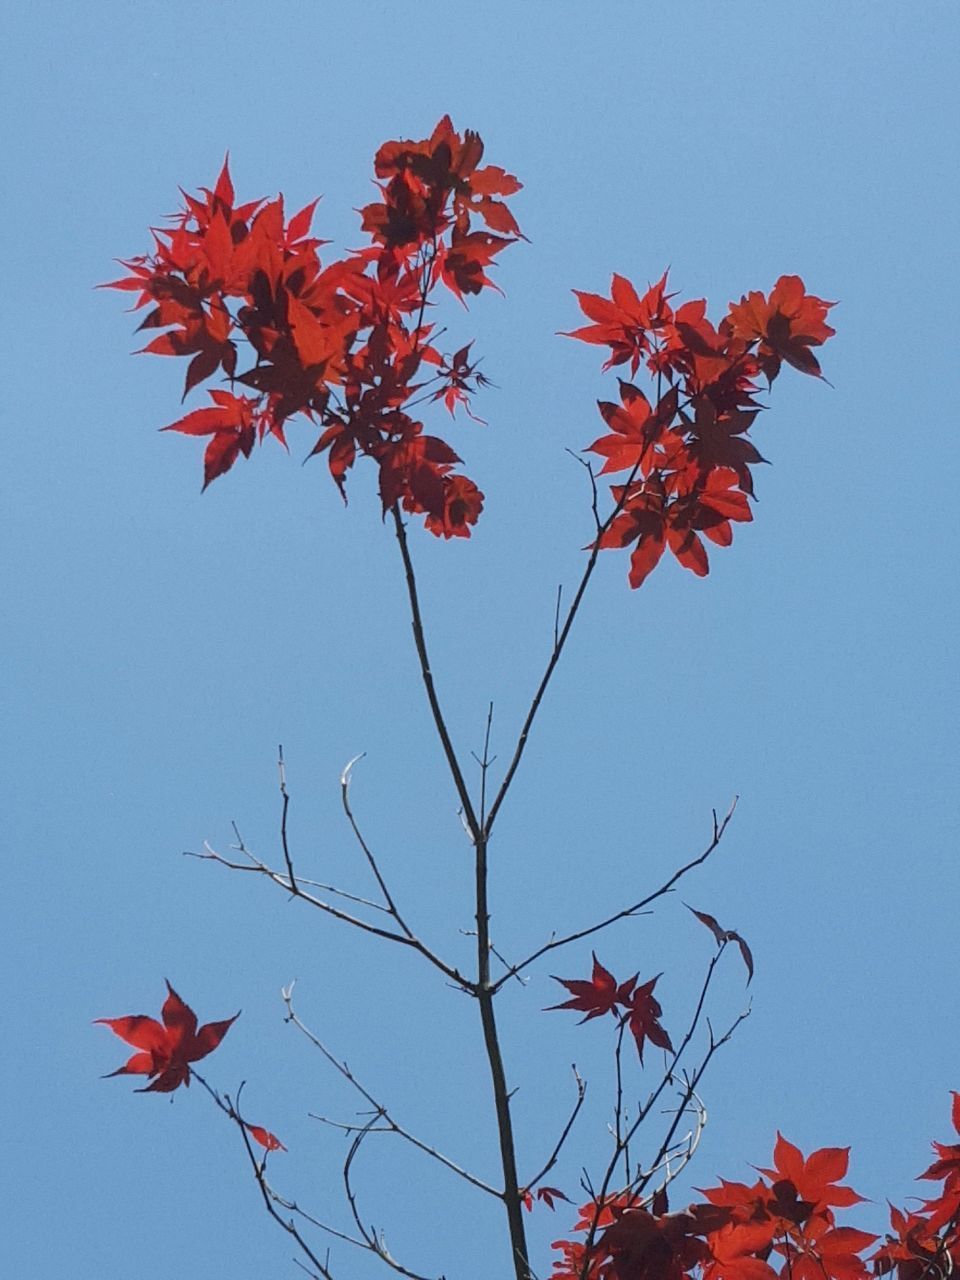 LOW ANGLE VIEW OF RED MAPLE TREE AGAINST CLEAR SKY